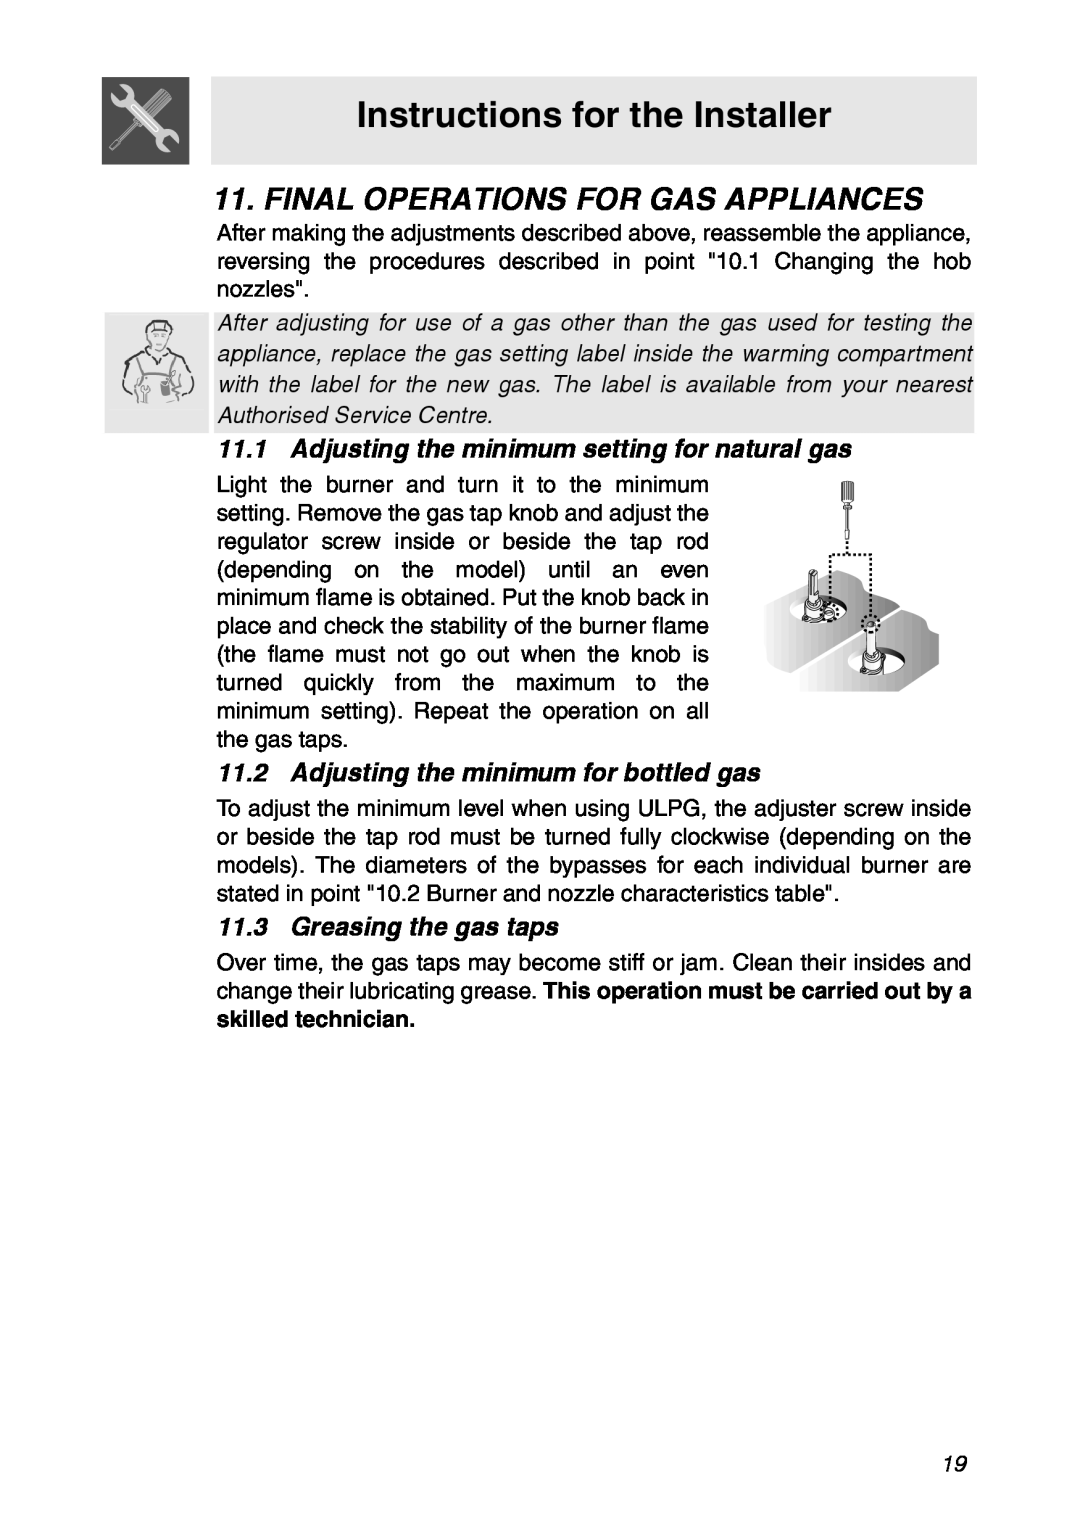 Smeg CIR900X Final Operations For Gas Appliances, Instructions for the Installer, Adjusting the minimum for bottled gas 